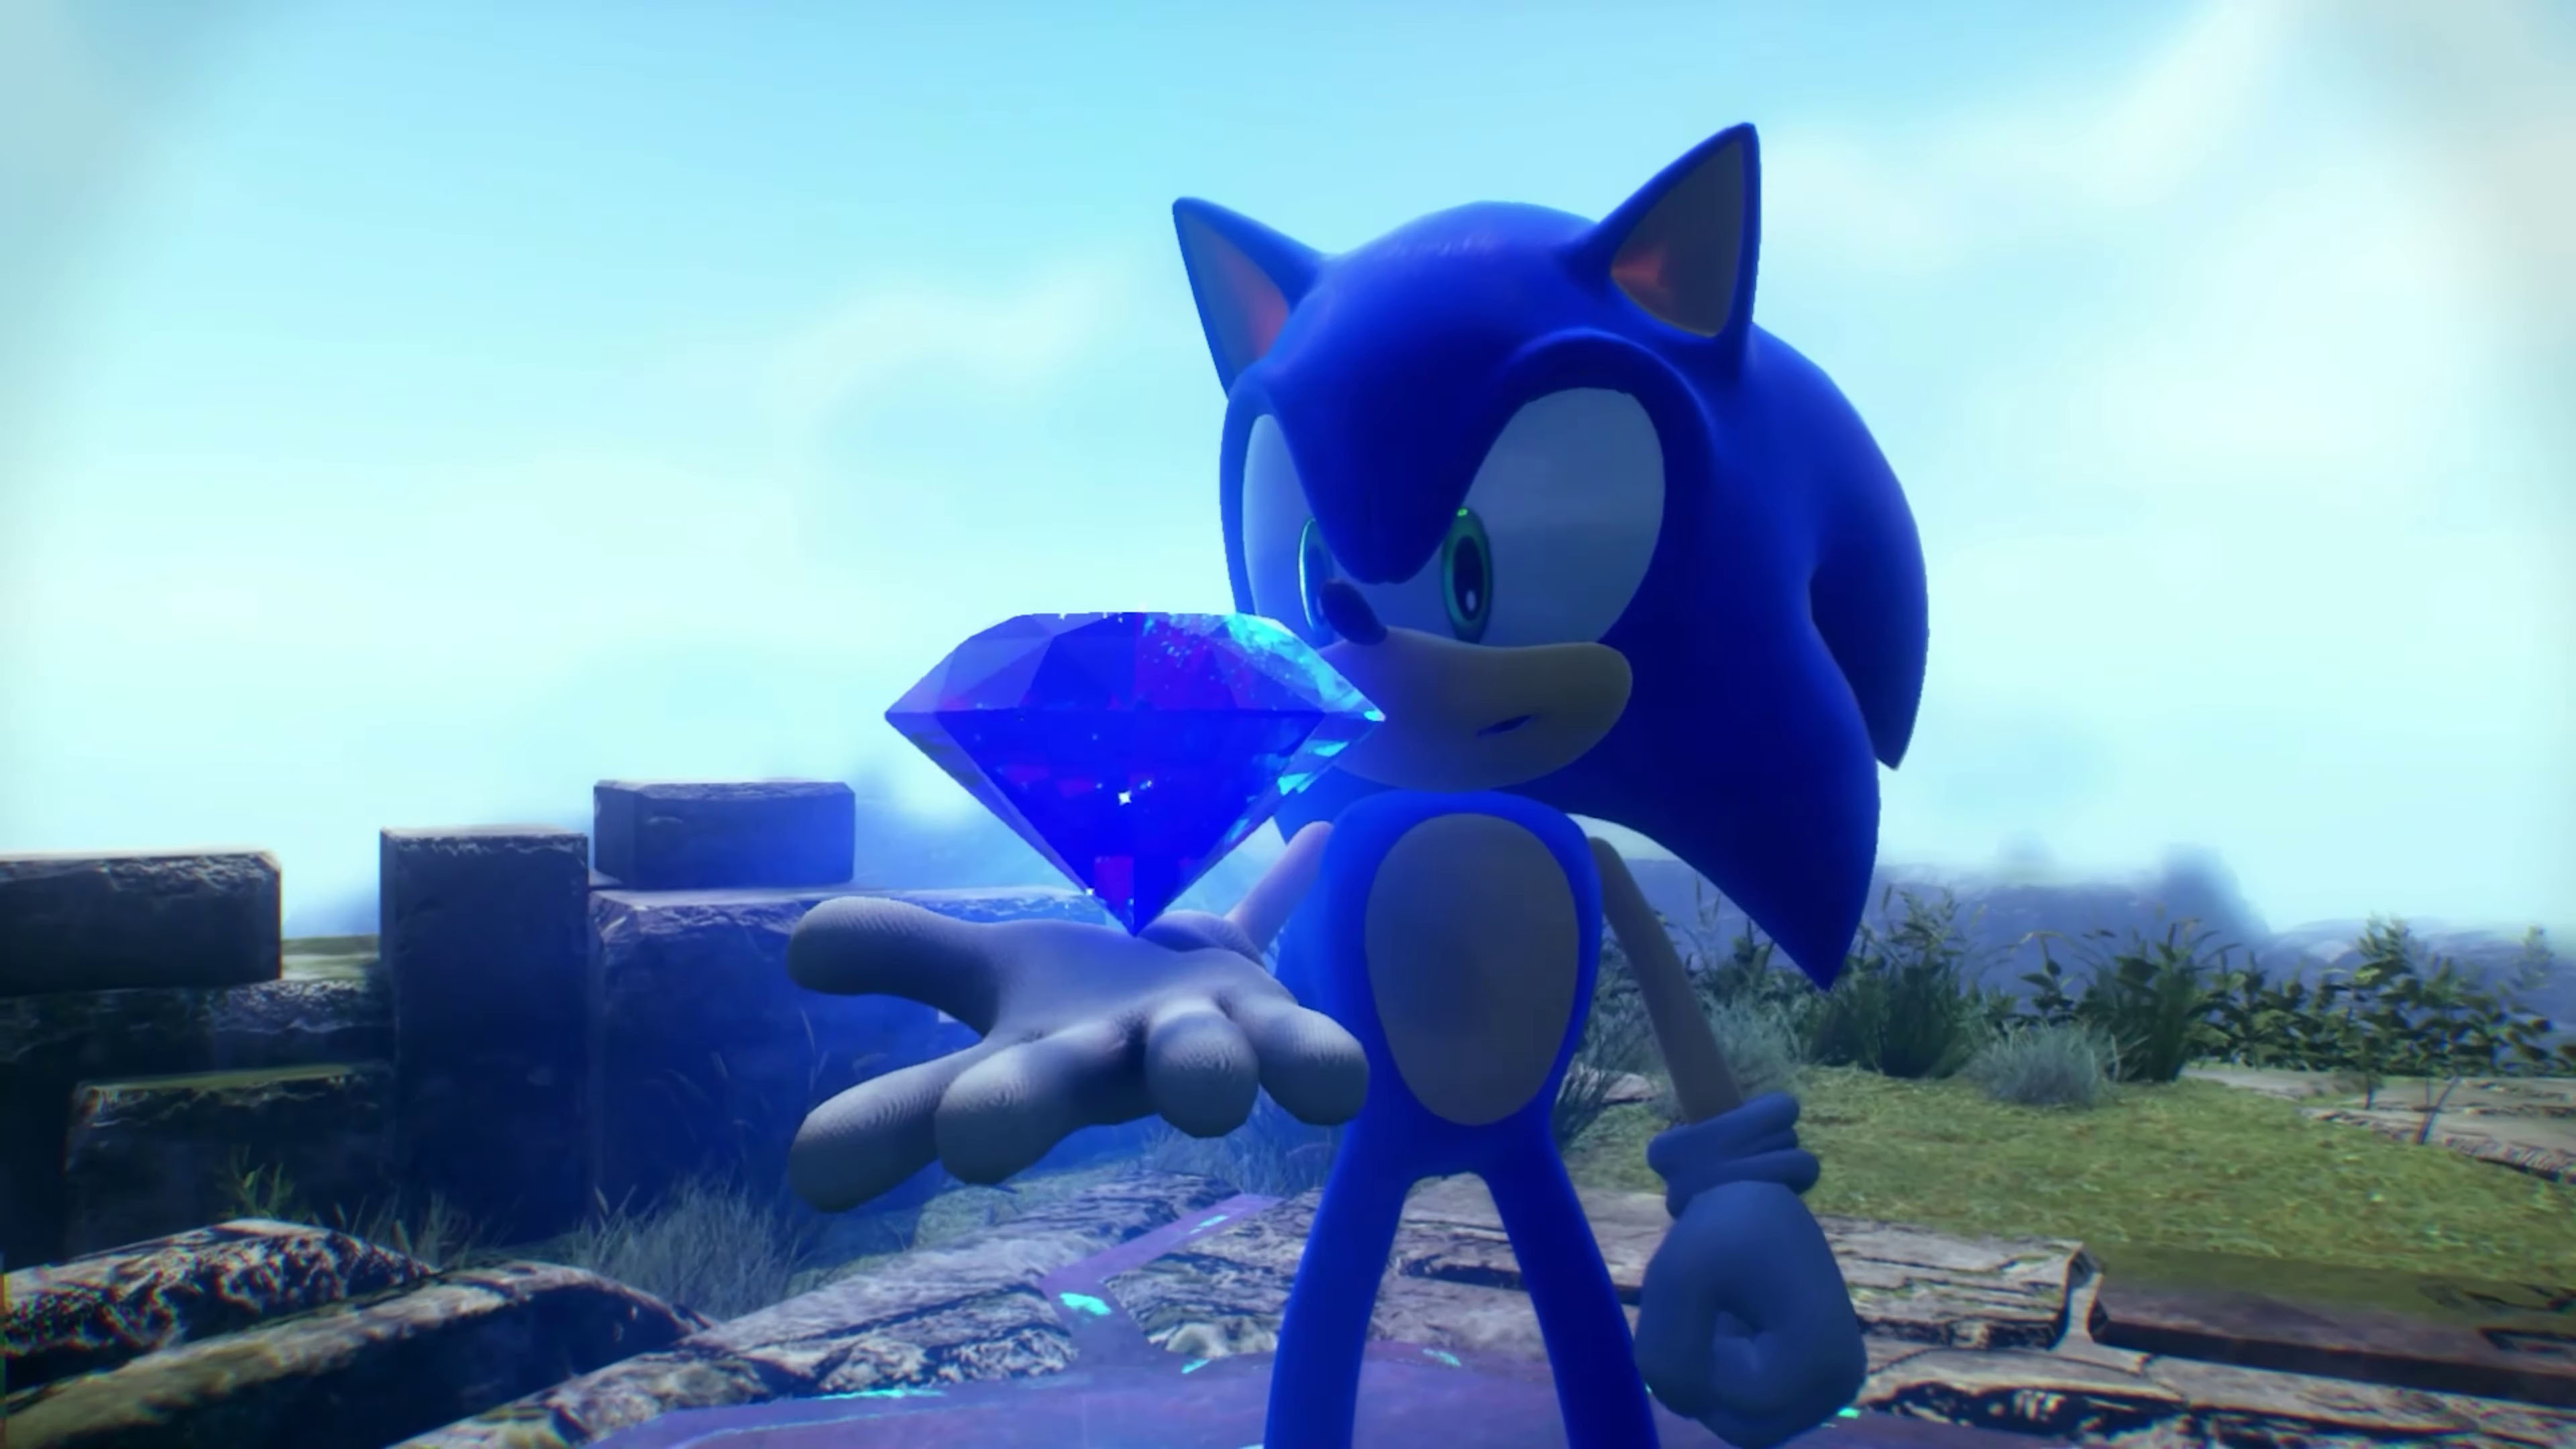 Sonic Frontiers gameplay shows off a whole bunch of nothing